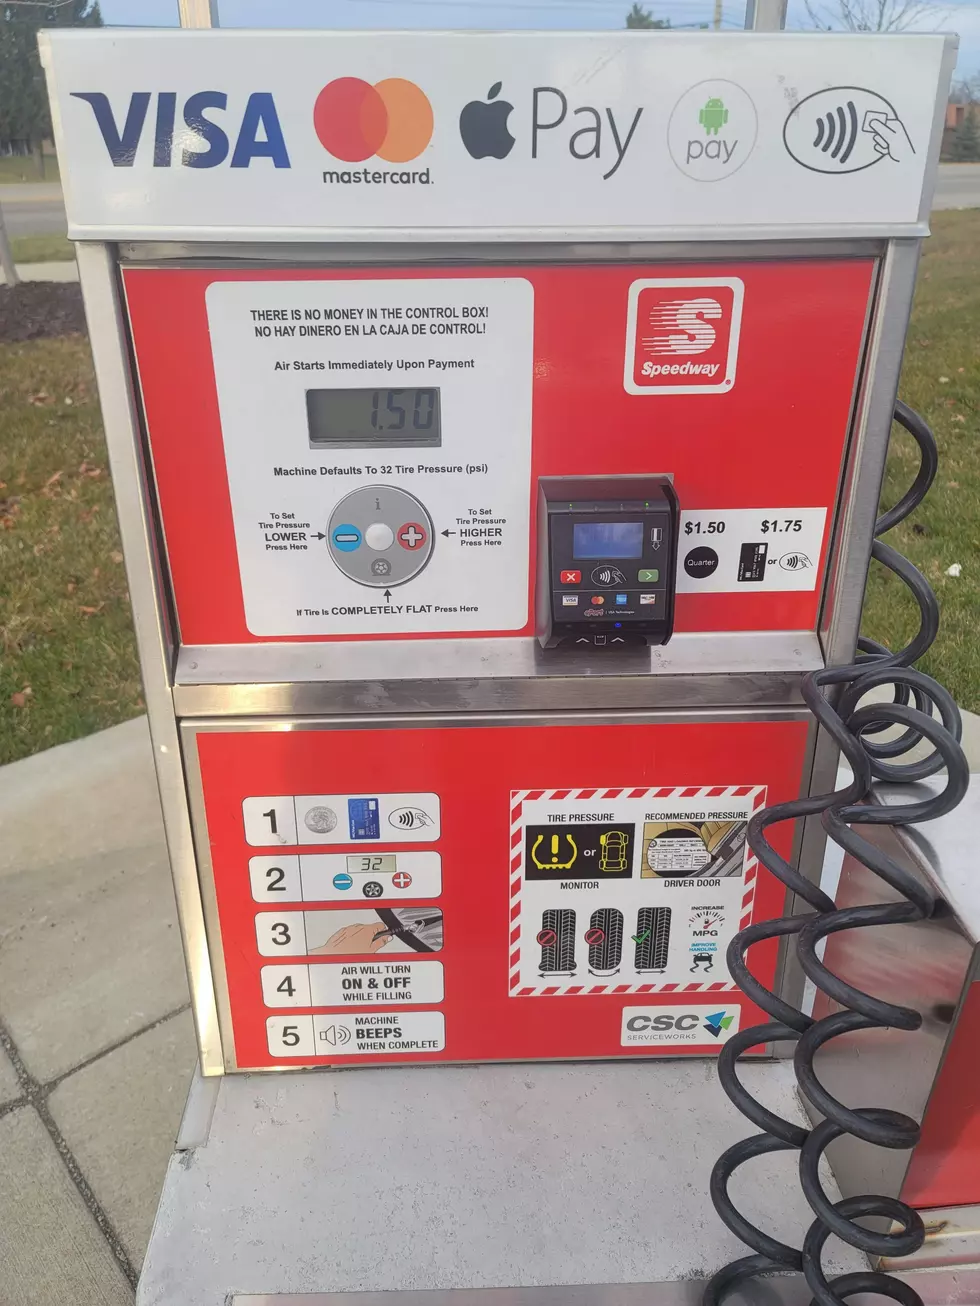 Why Are We Paying So Much For Air At Gas Stations In Michigan?